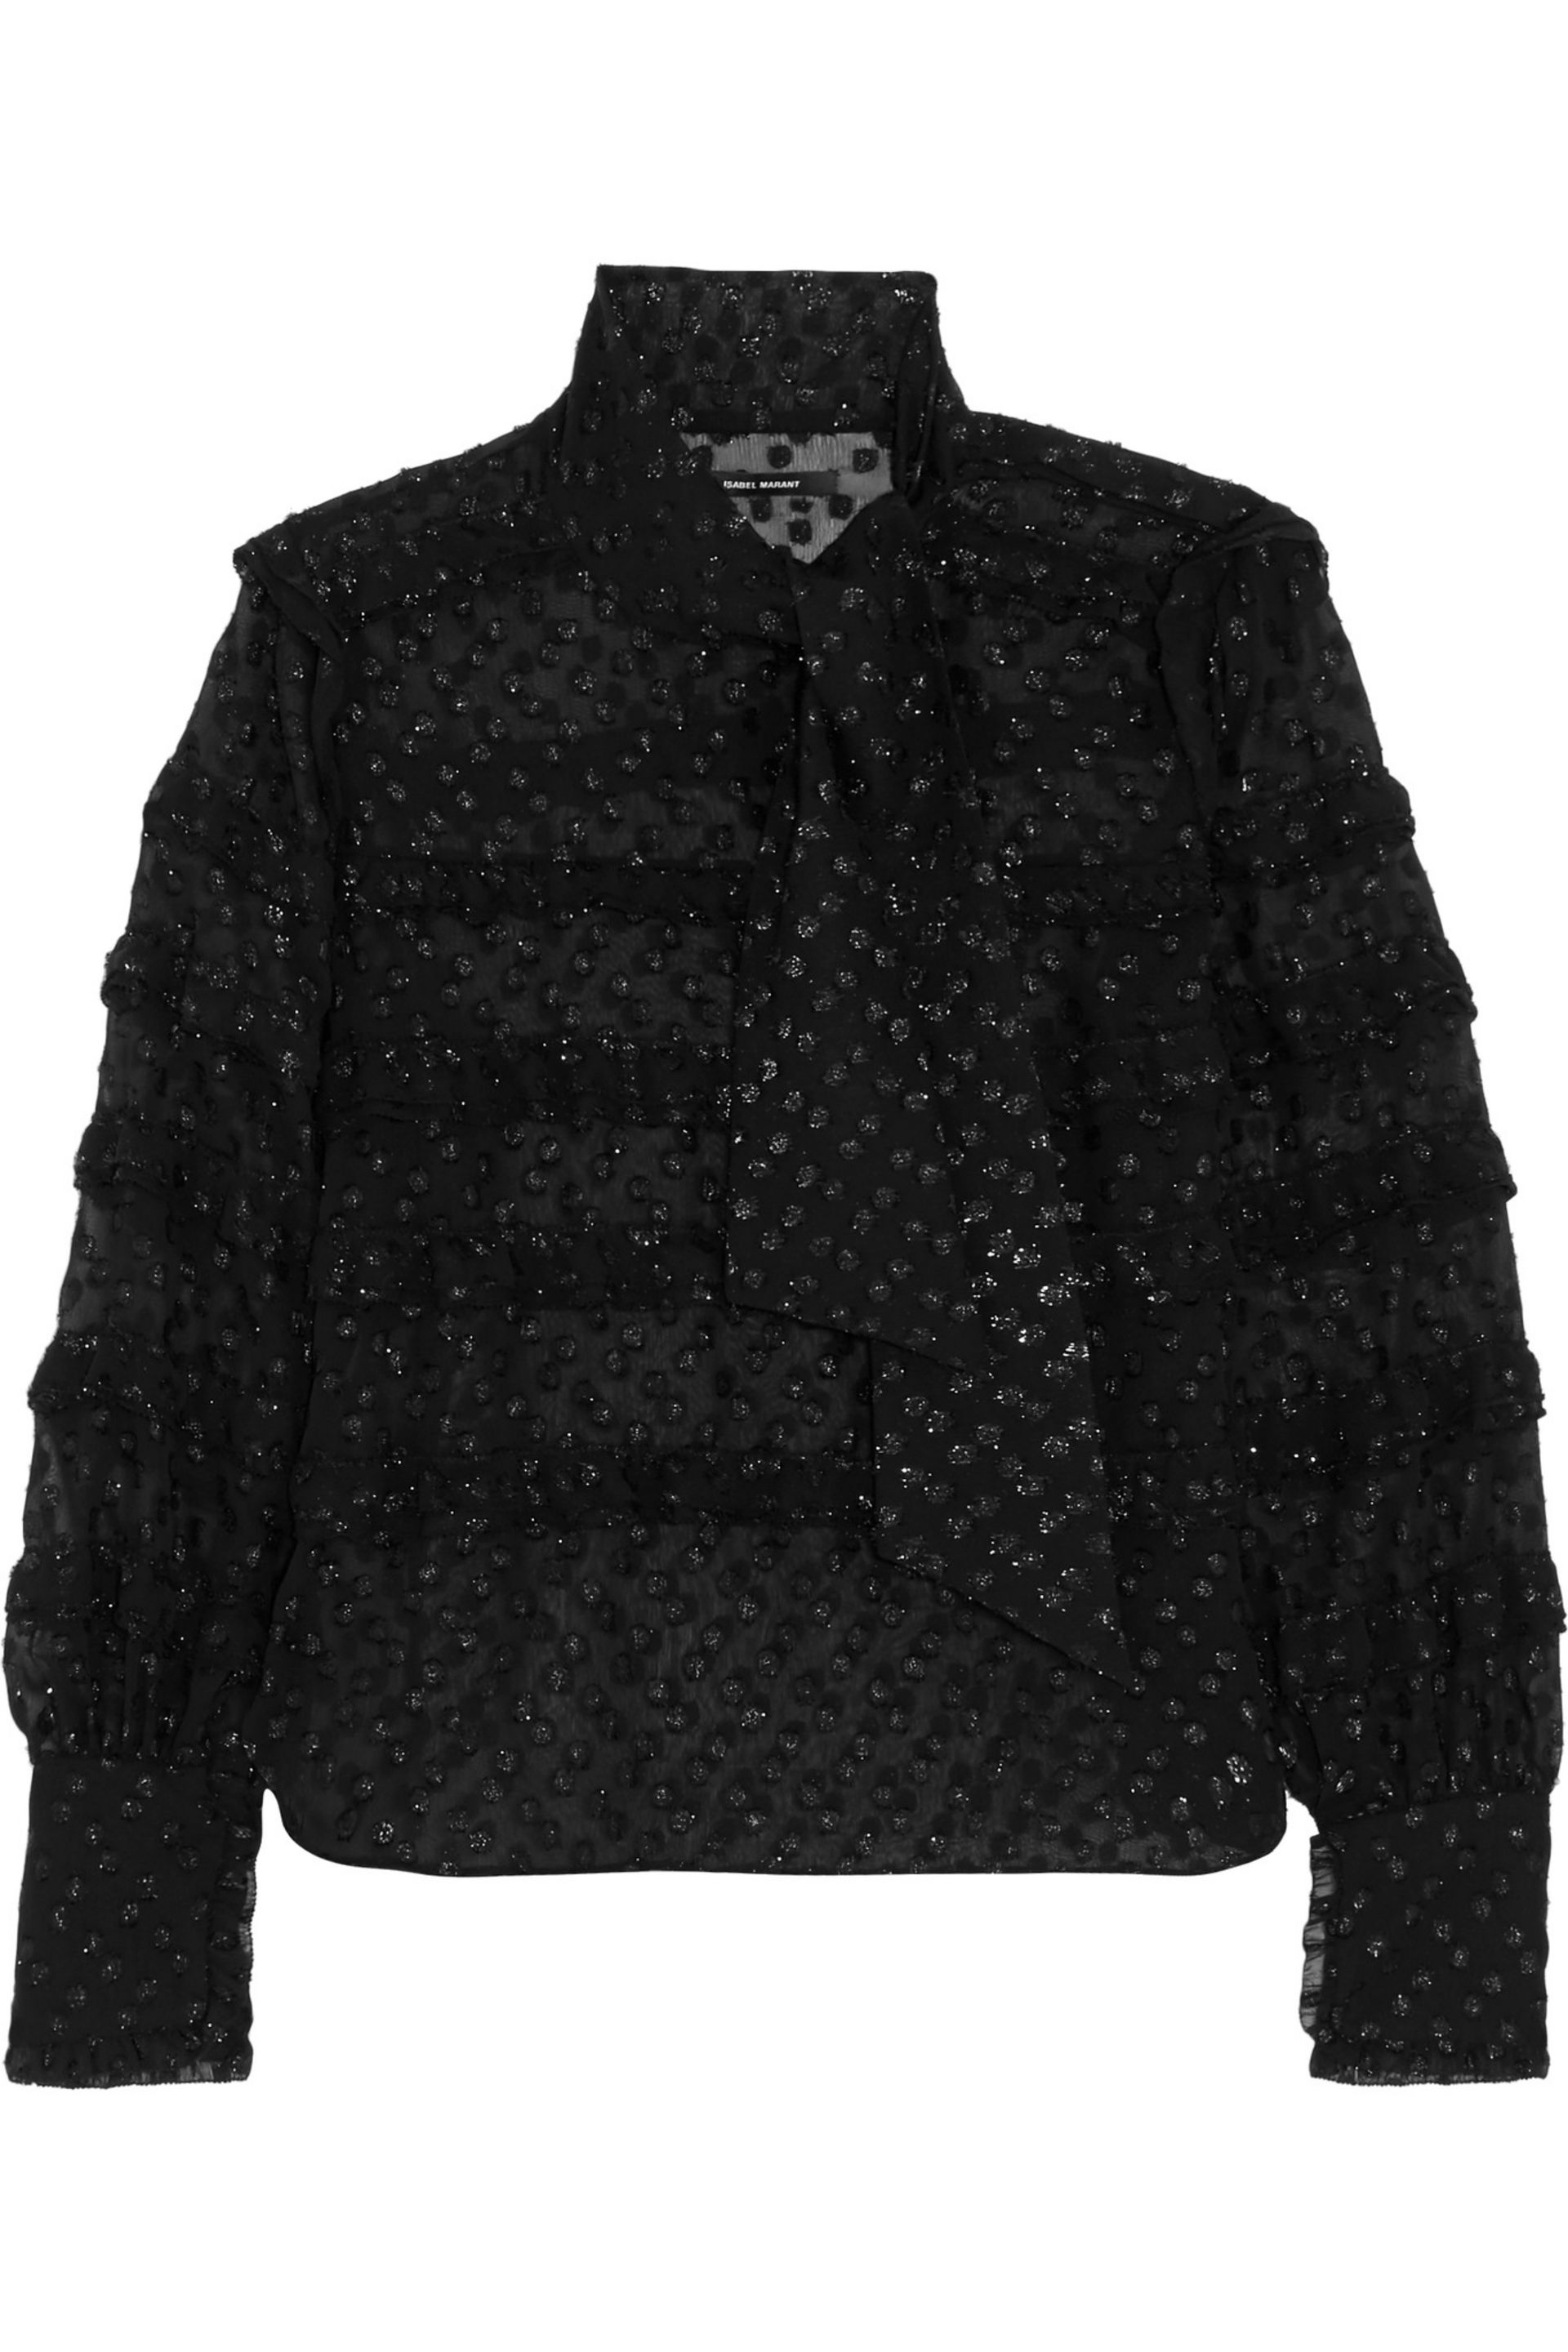 Isabel Marant | Sale up to 70% off | US | THE OUTNET